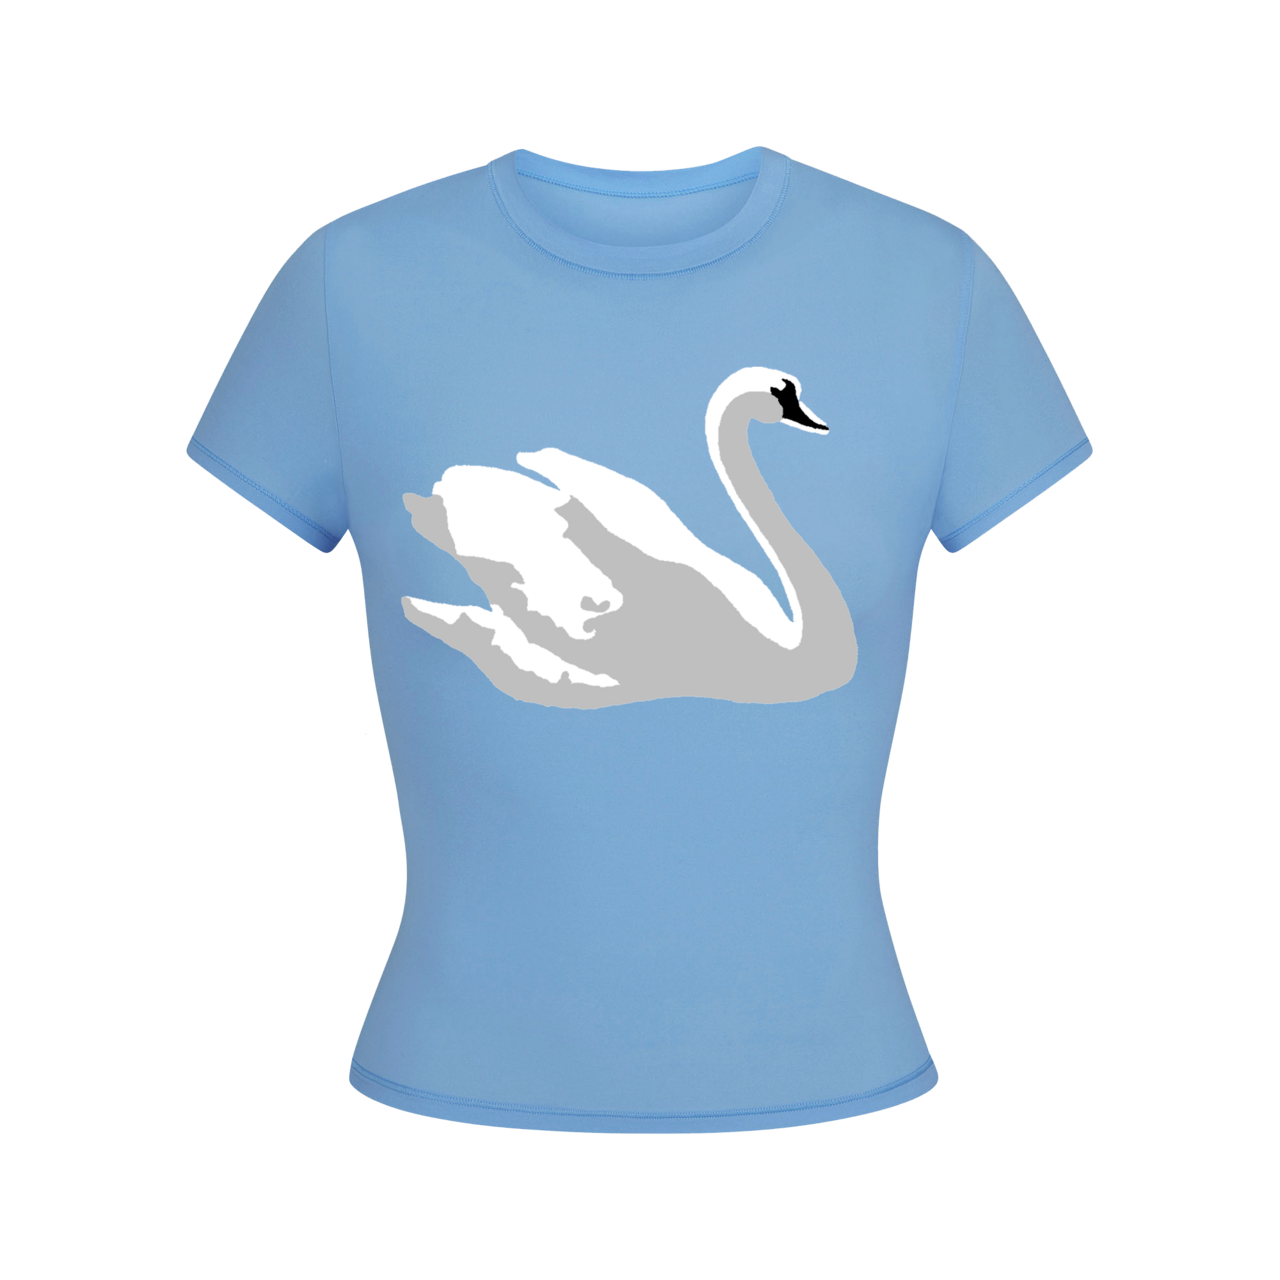 Lana Del Rey - Blue Cropped T-Shirt with Swan